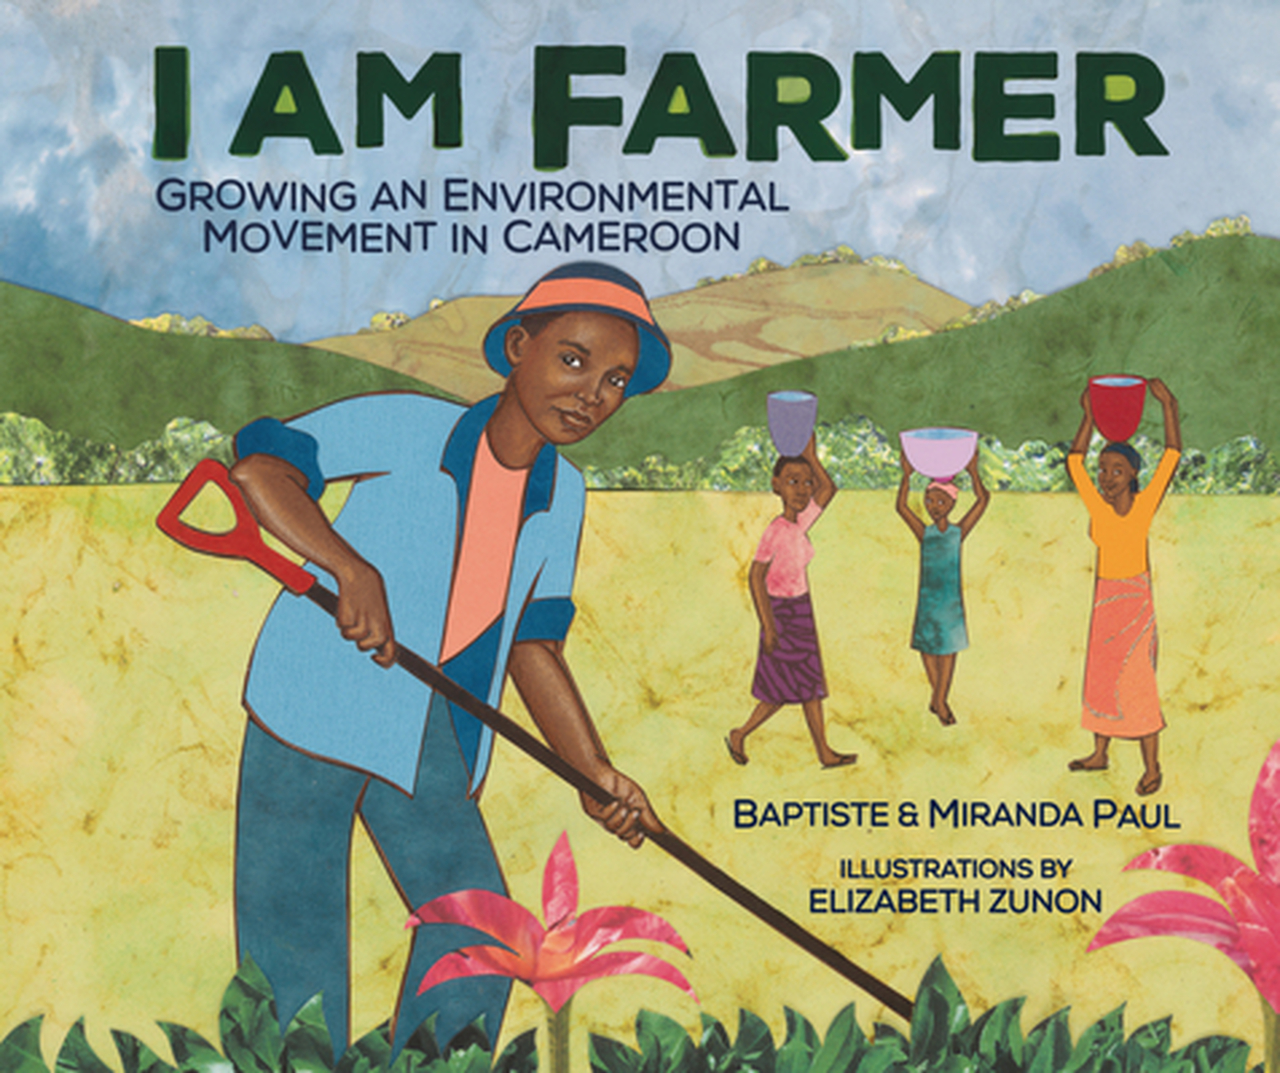 Cover of the book I Am Farmer: Growing an Environmental Movement in Cameroon. Features an individual using a hoe in the foreground and three individuals carrying water in the background.